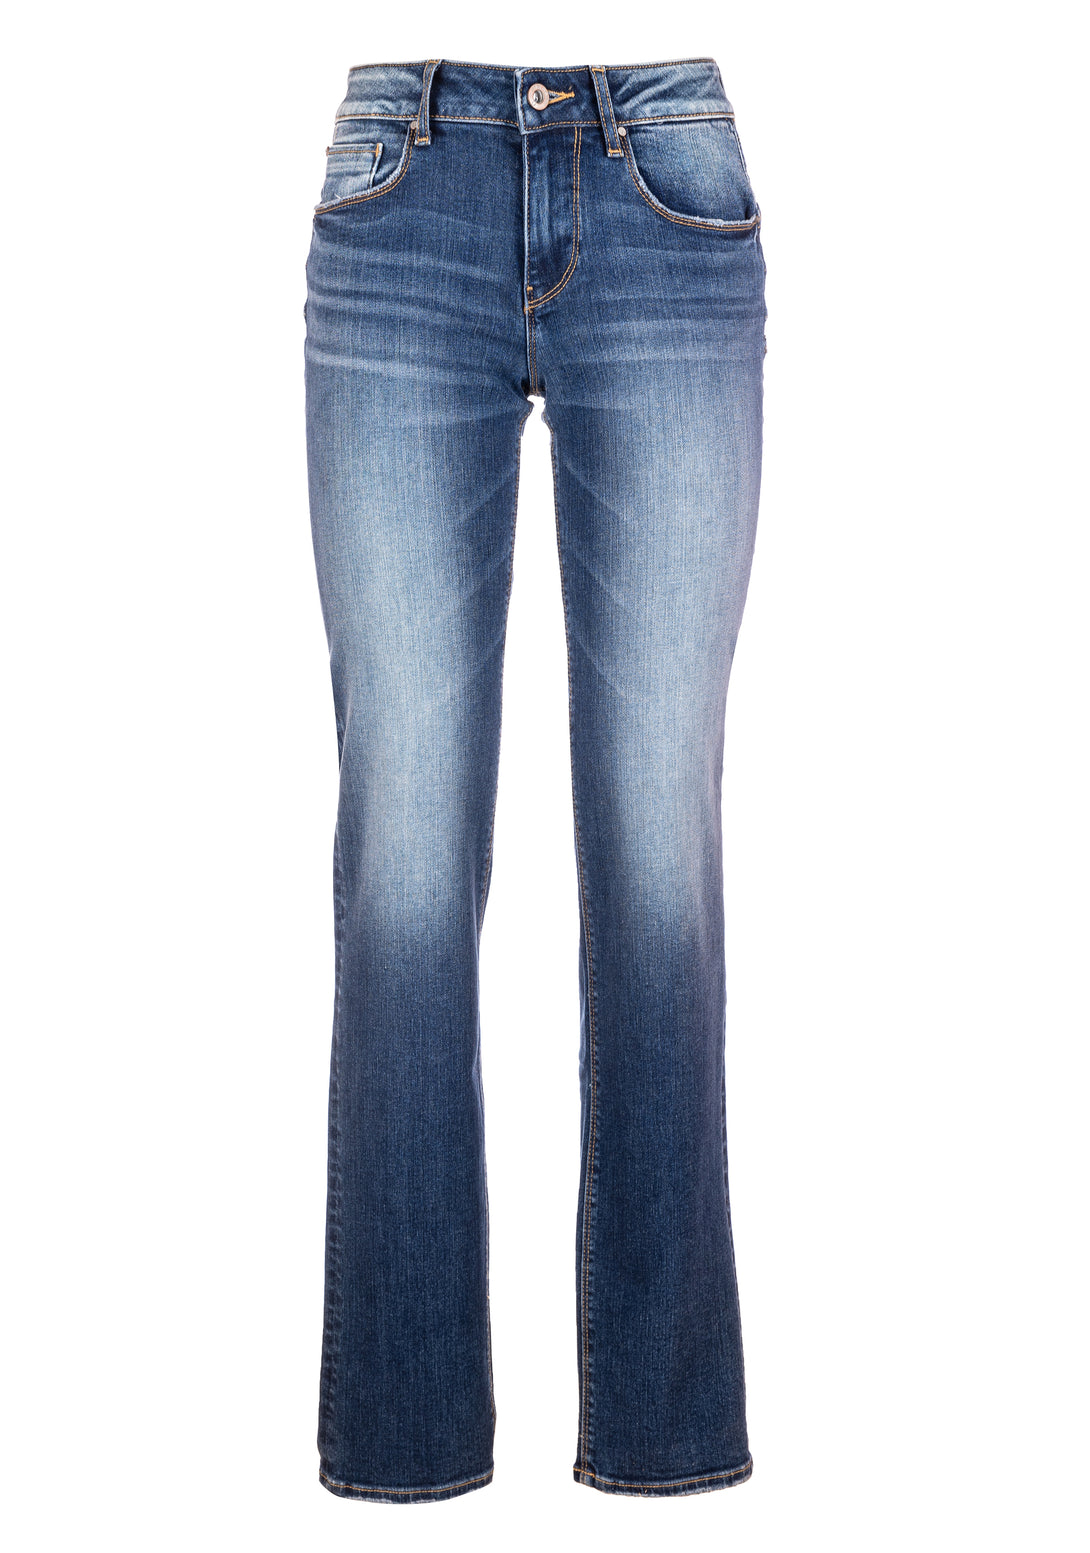 Jeans flare with push up effect made in denim with middle wash and stone